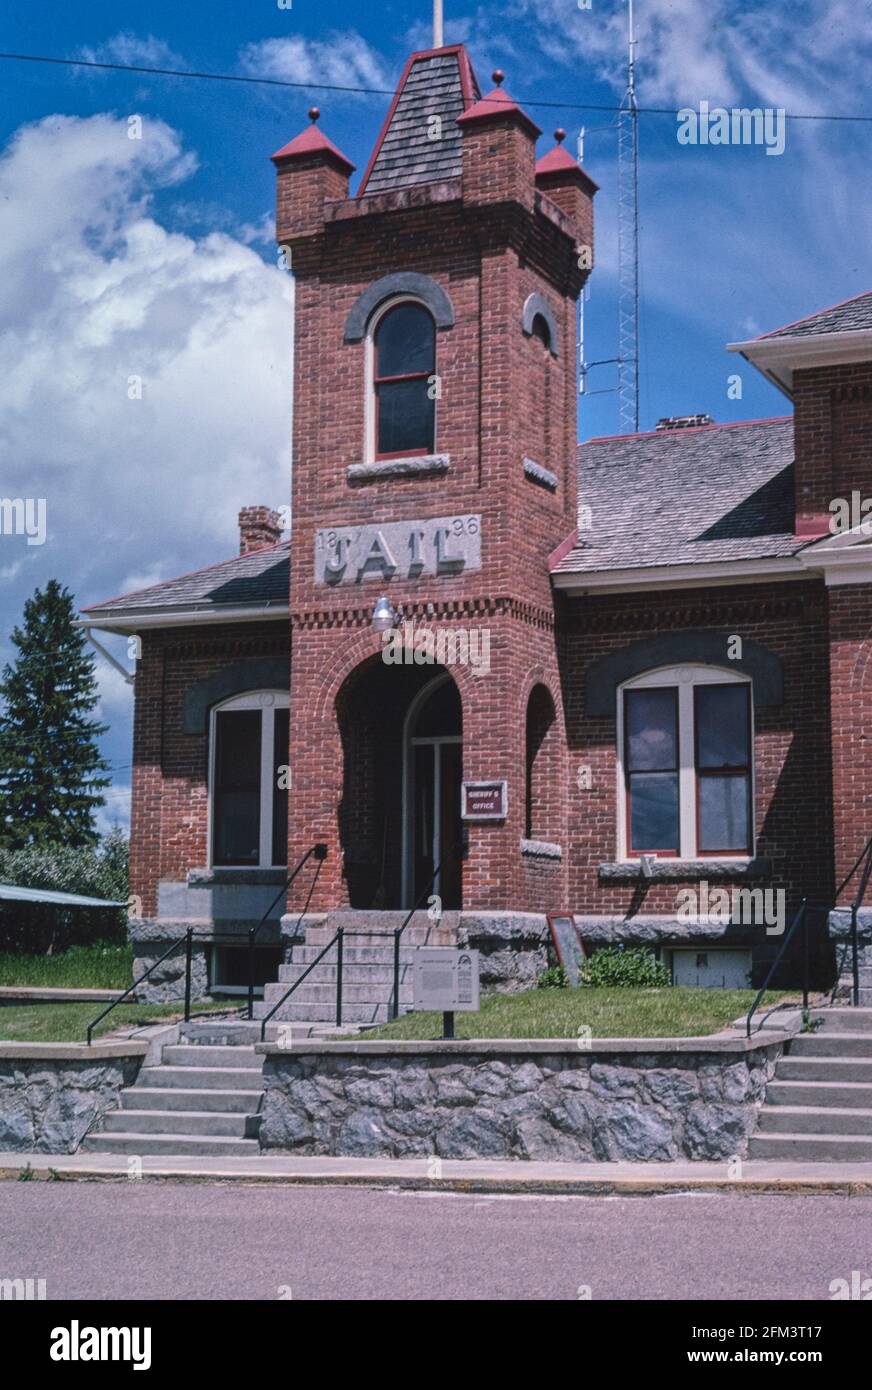 Jail (1896) now a police station view from right Philipsburg Montana ca. 2004 Stock Photo